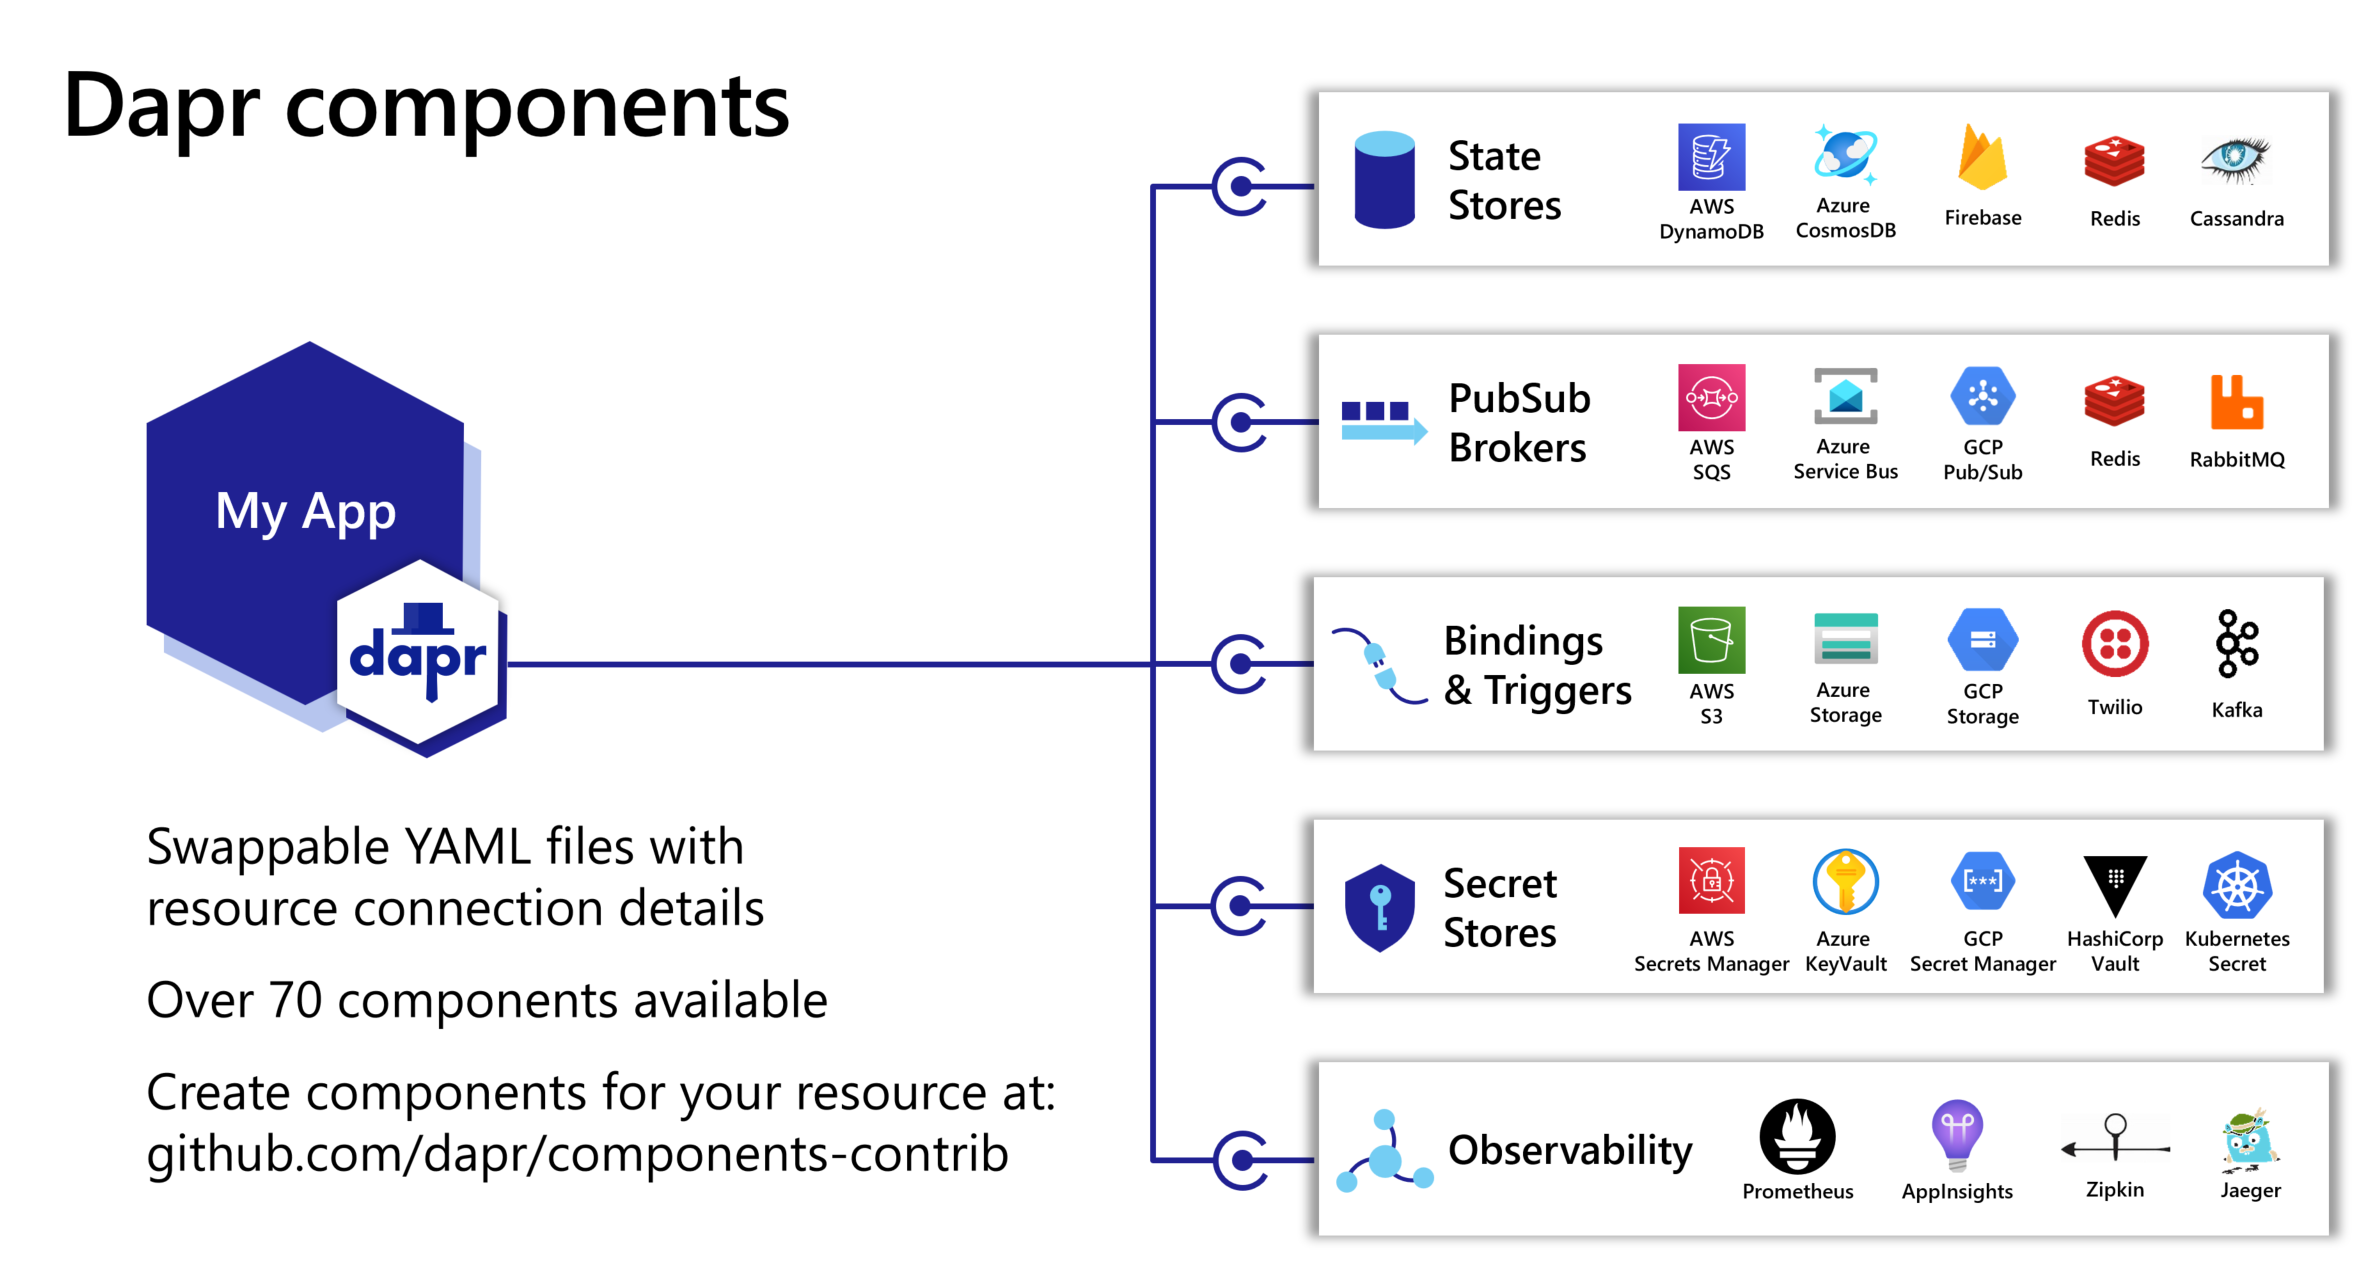 Dapr components (Copyright by Microsoft)